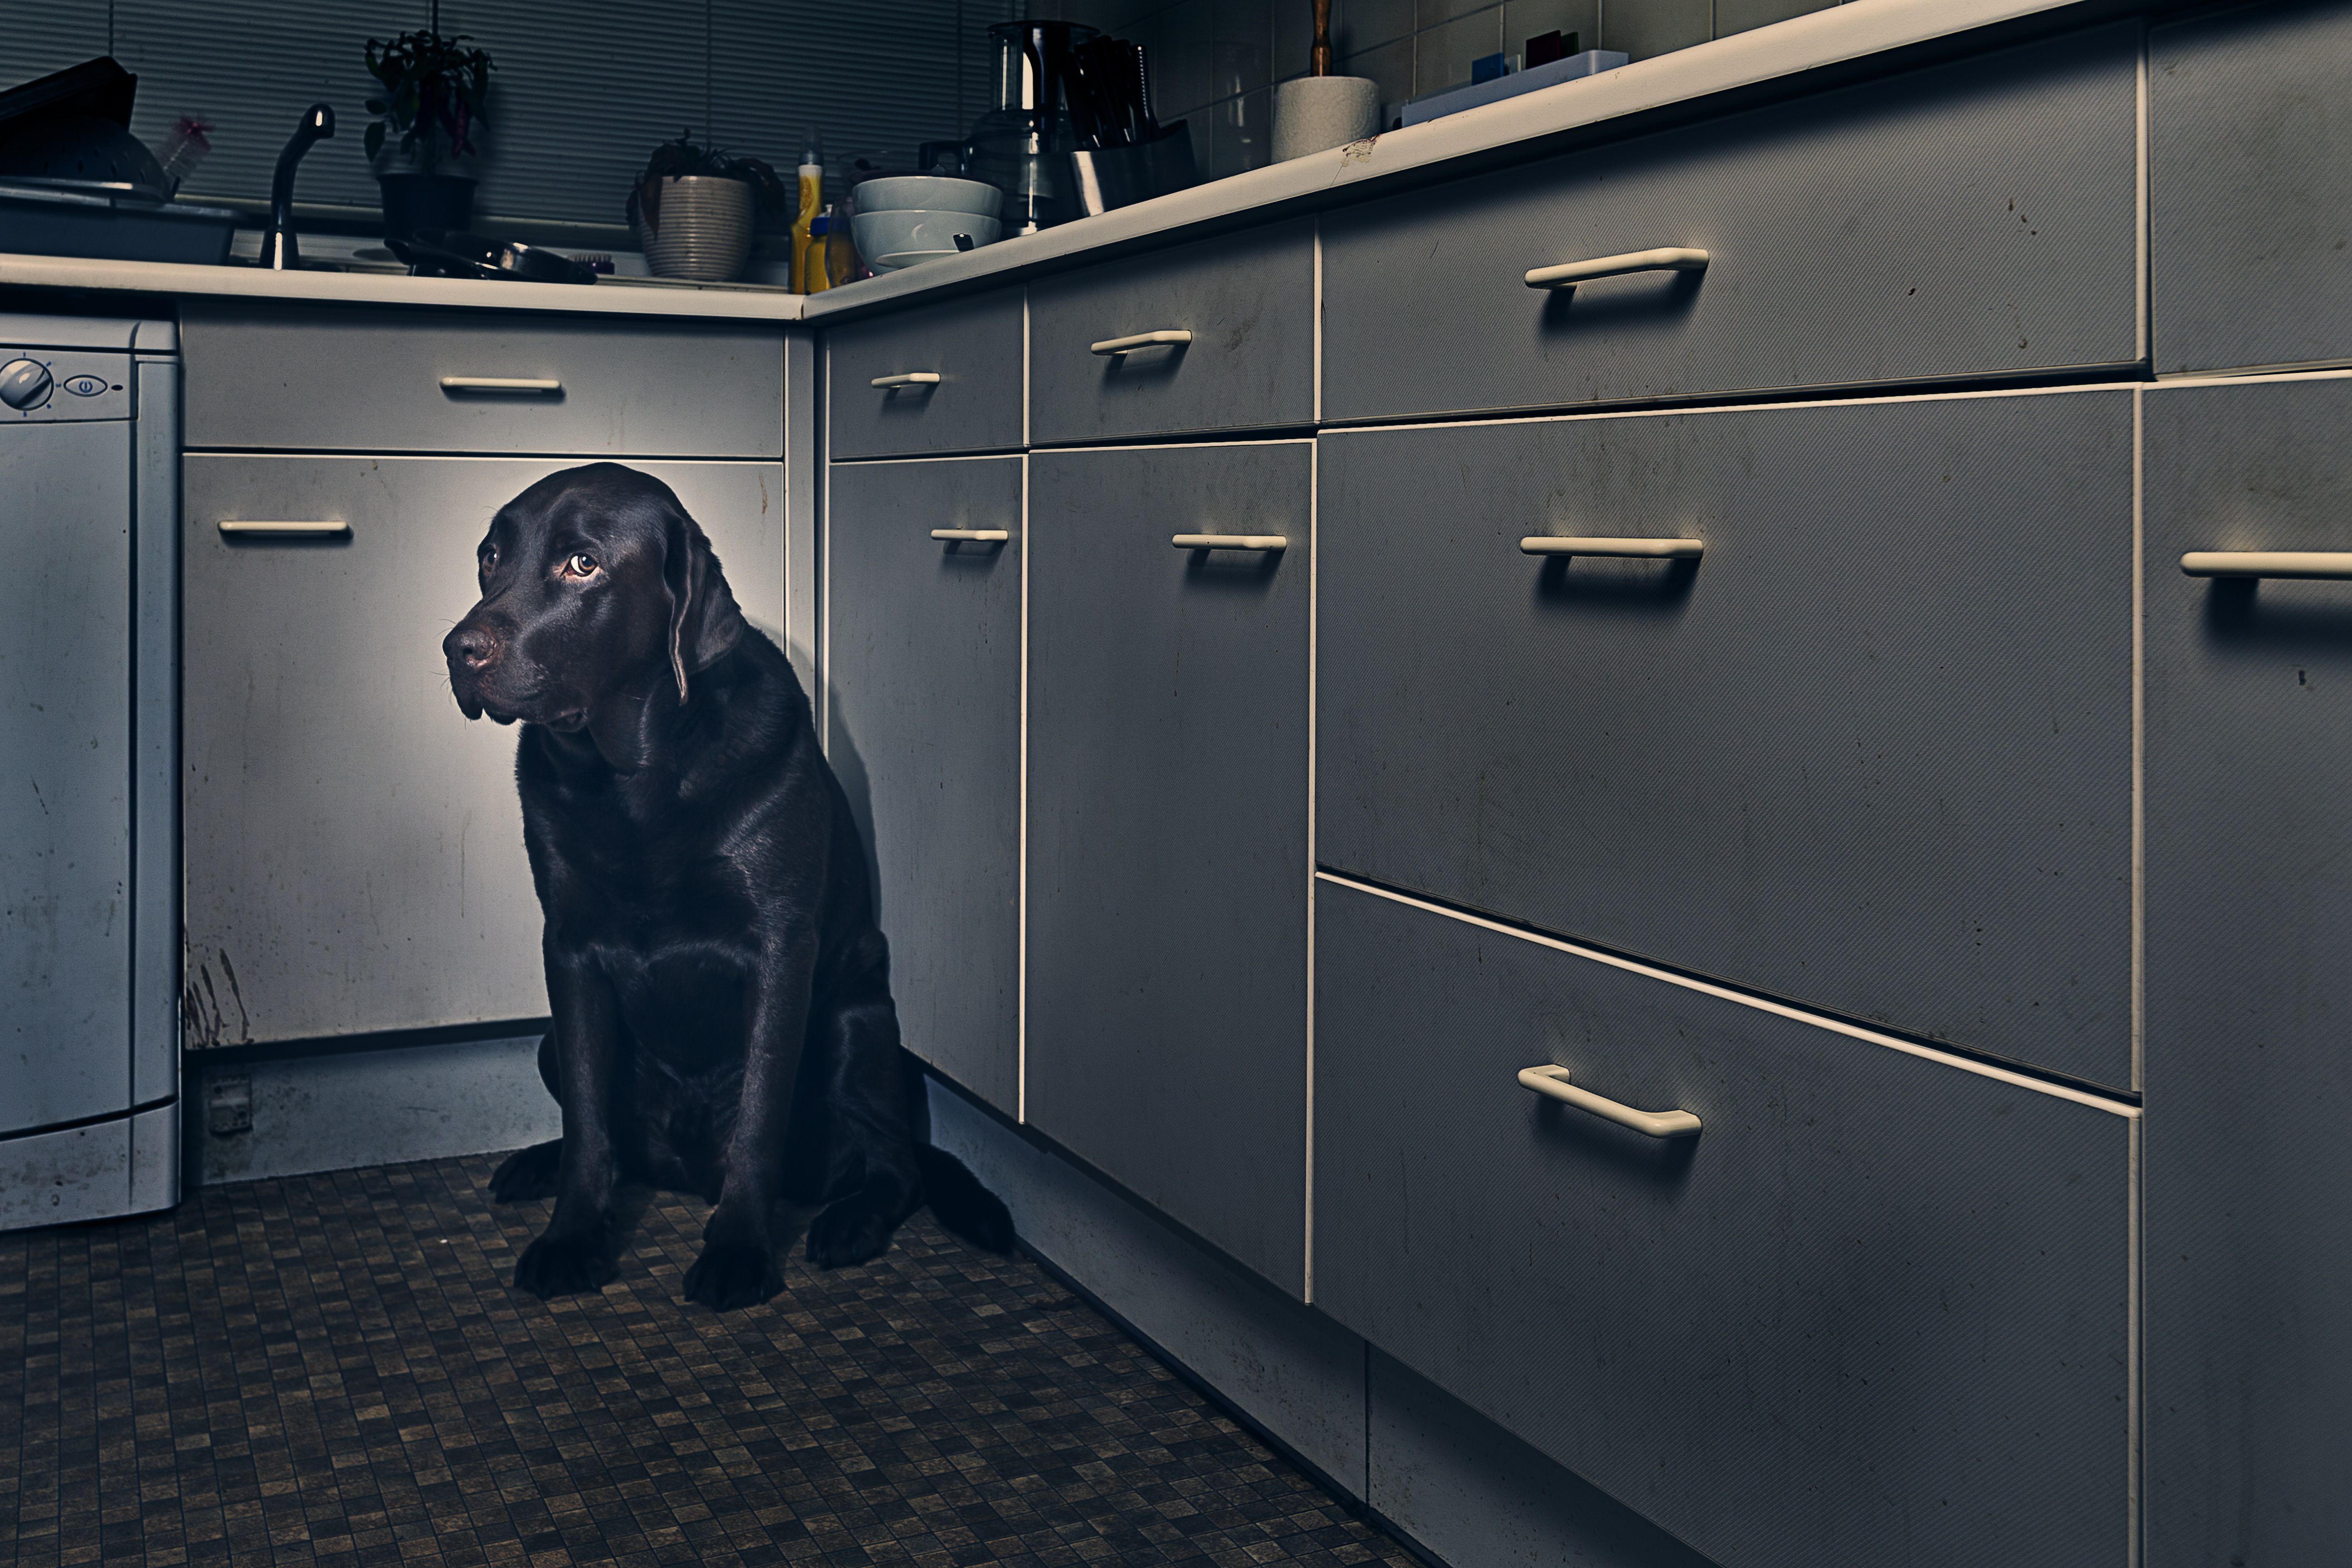 Frightened dog in a kitchen